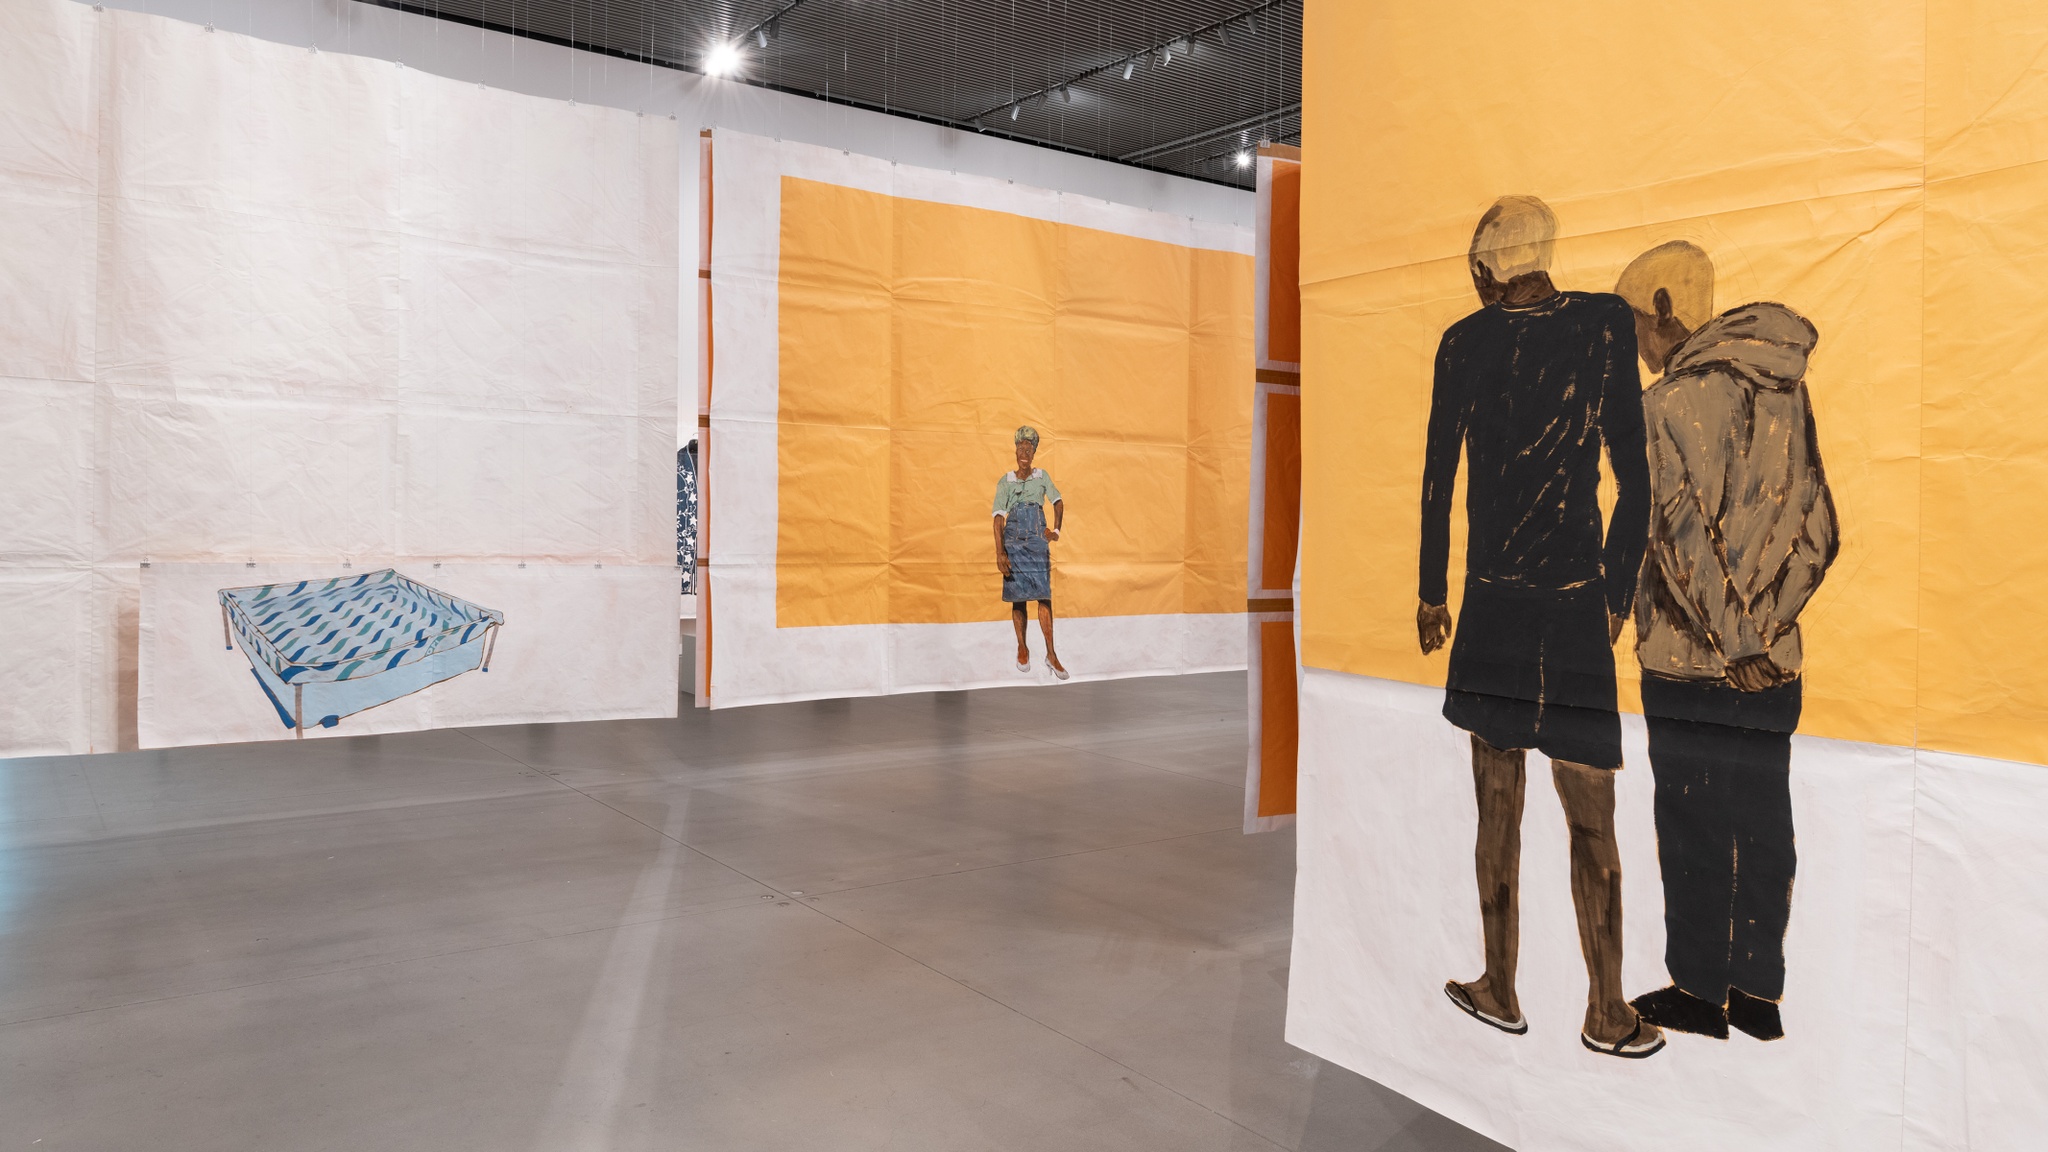 An art gallery with paintings on paper that hang from the ceiling to form passages. A corner formed by paintings reveals a painting of a Black woman posing against a yellow brown background. Another painting depicts a blue plastic pool against an all-white background. A final painting in the foreground shows two young Black men standing together with backs to the viewer. They both have blond hair.